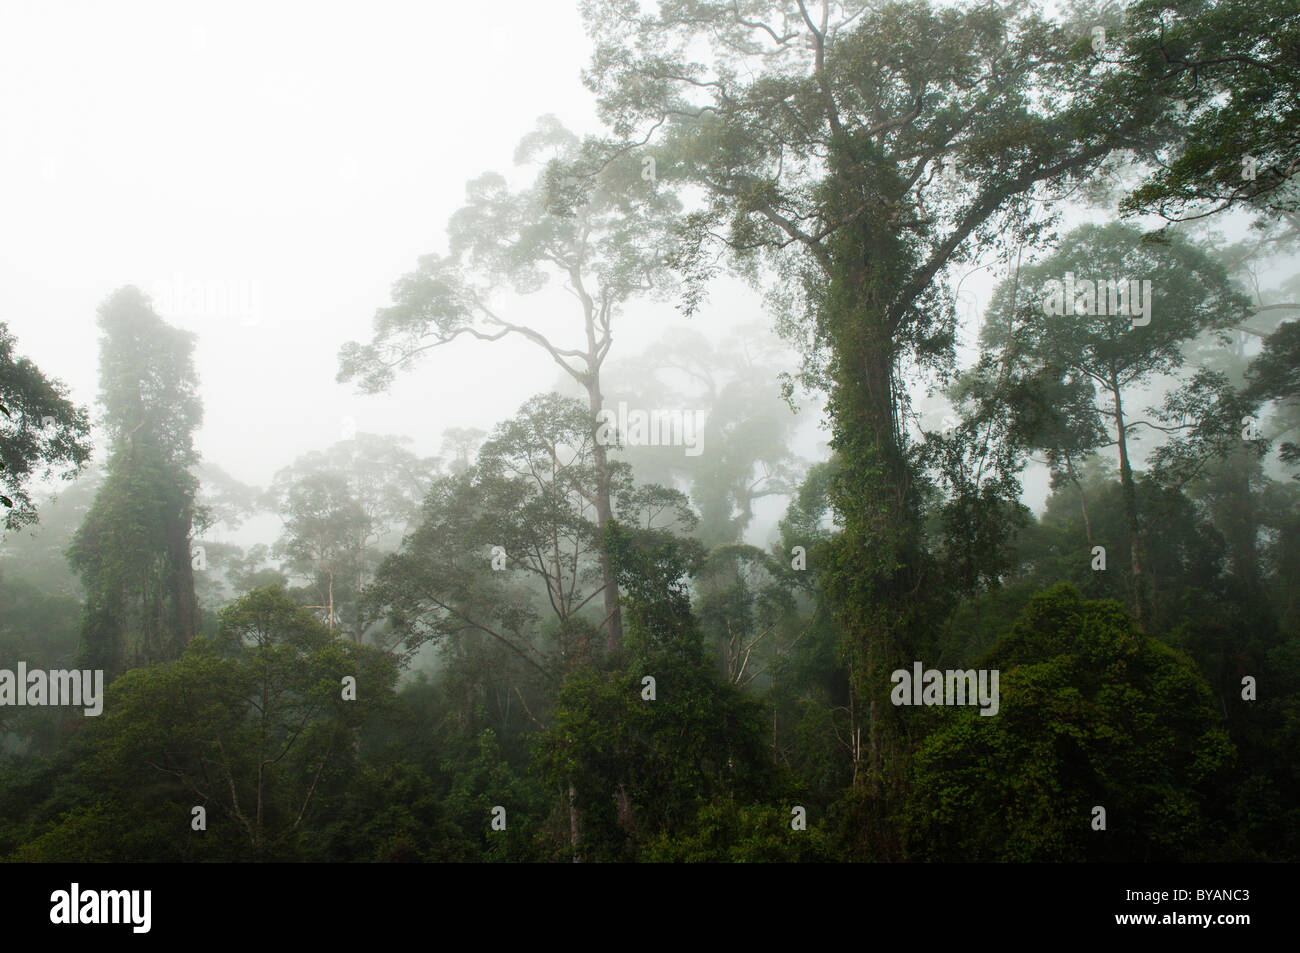 Virgin tropical rainforest canopy in morning mist in Danum Valley Conservation Area in Borneo, Malaysia Stock Photo